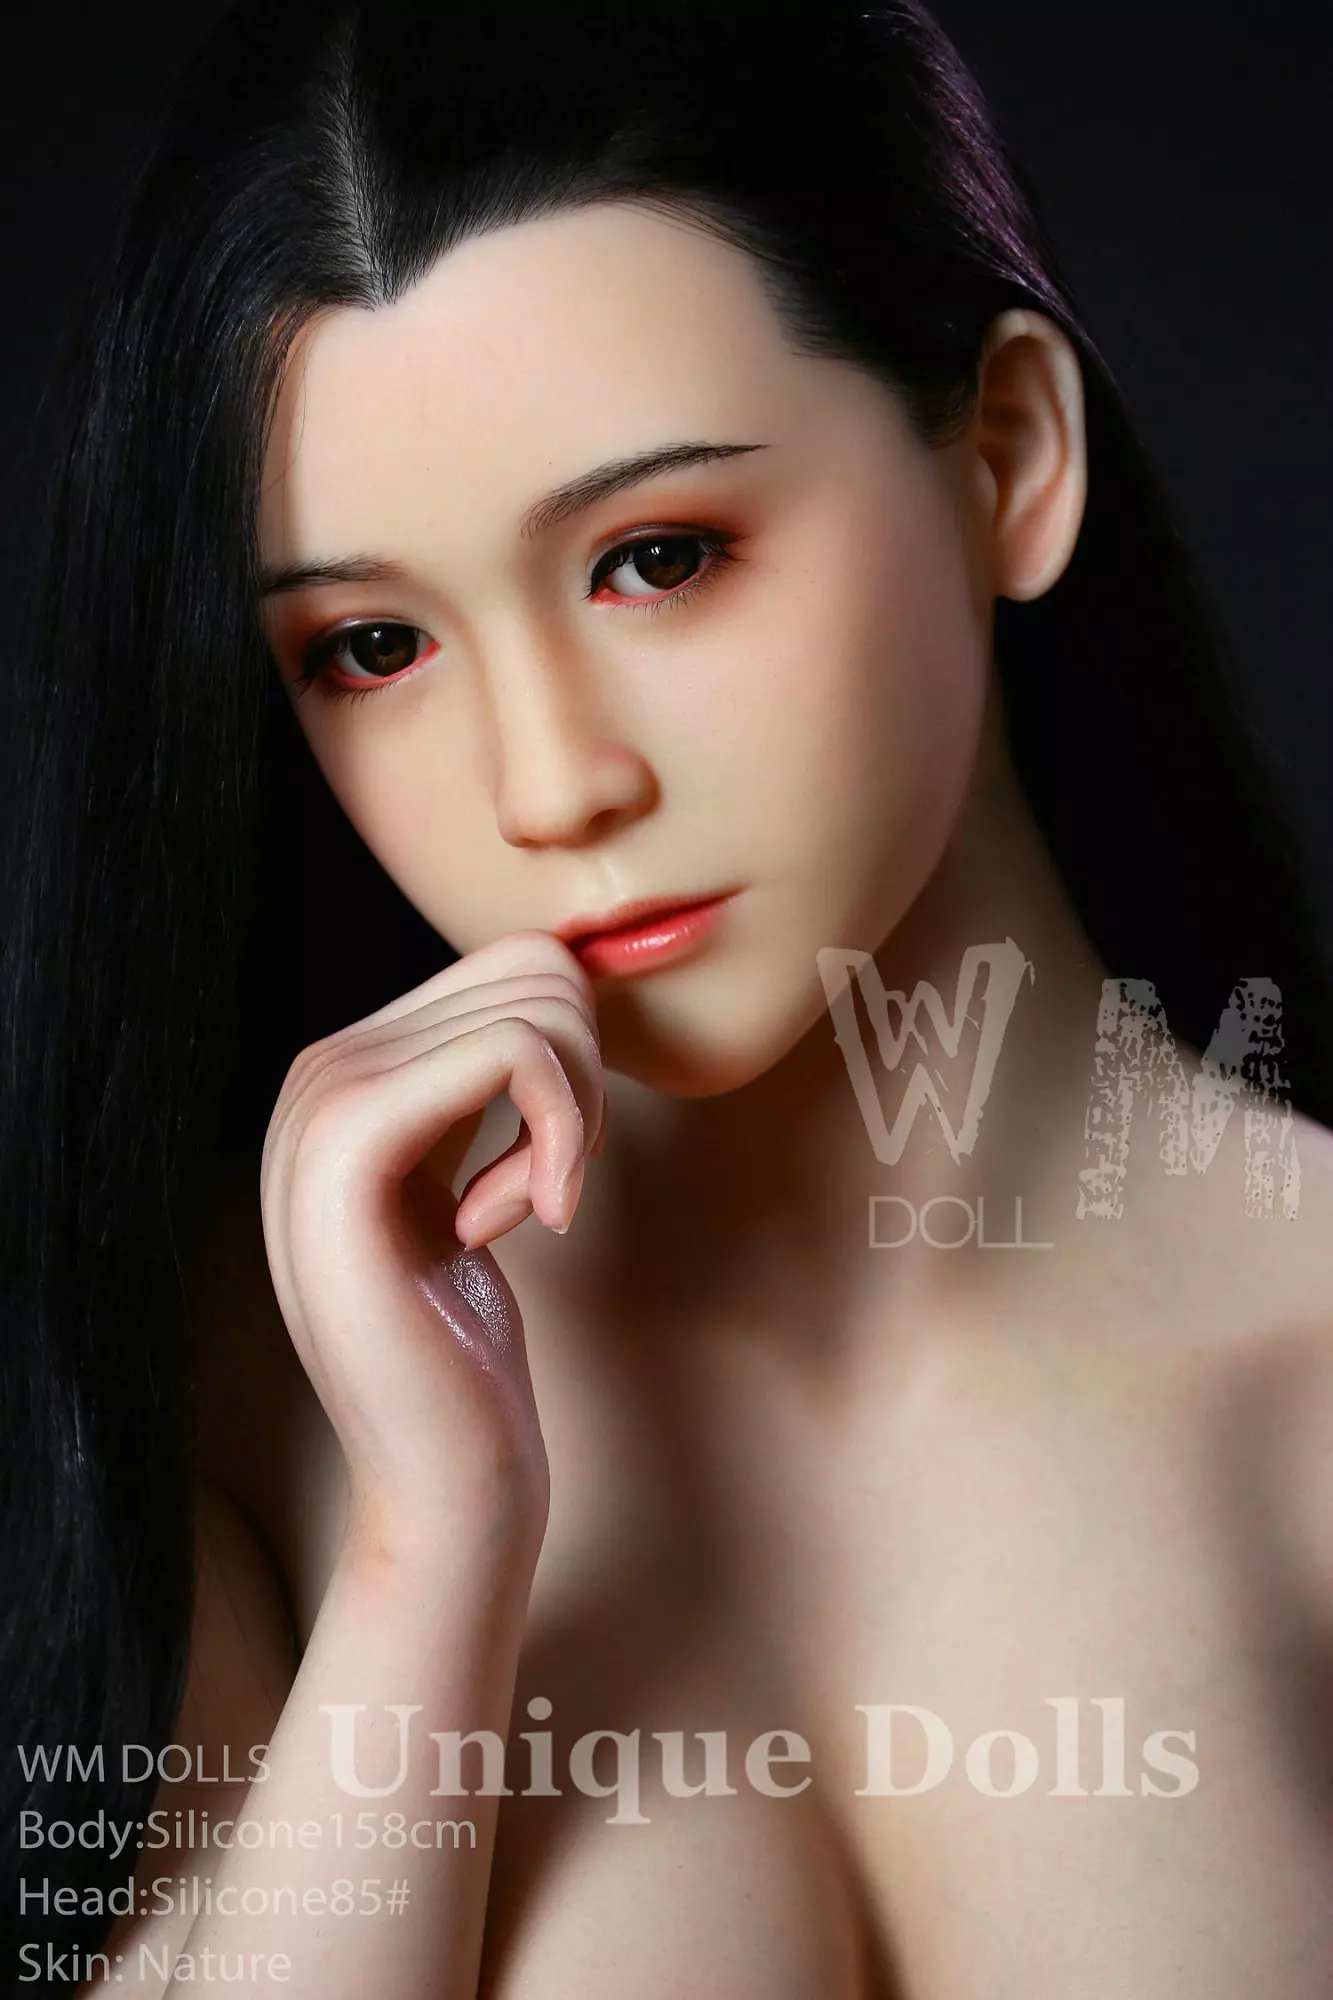 Angelkiss Doll full silicone 158cm doll with S85 Head